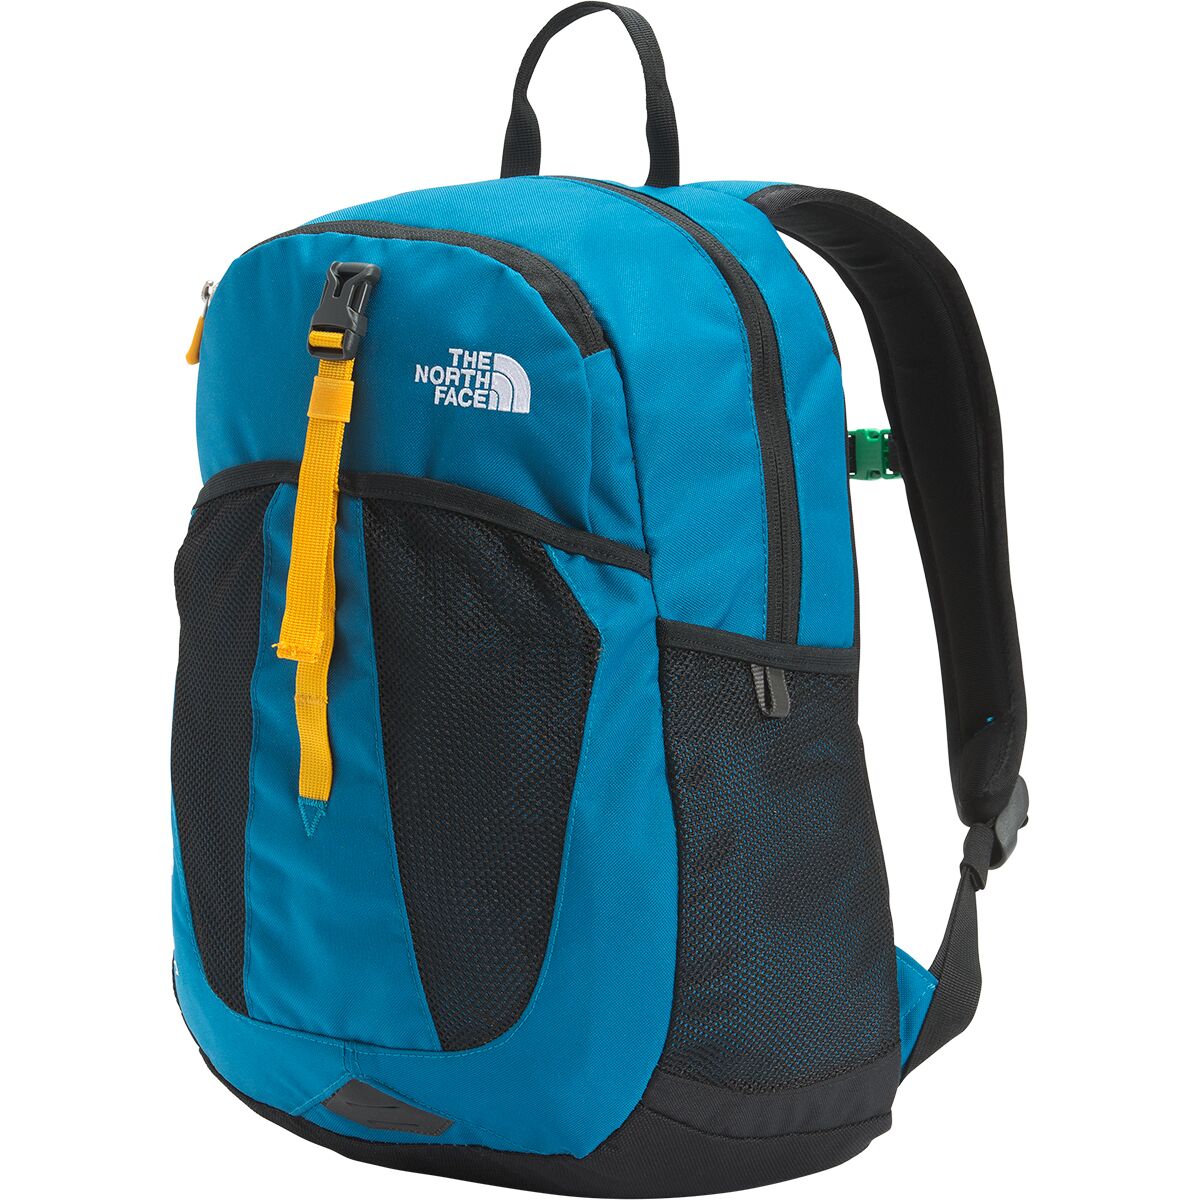 The North Face Recon Squash 17L Backpack - Kids' - Hike & Camp